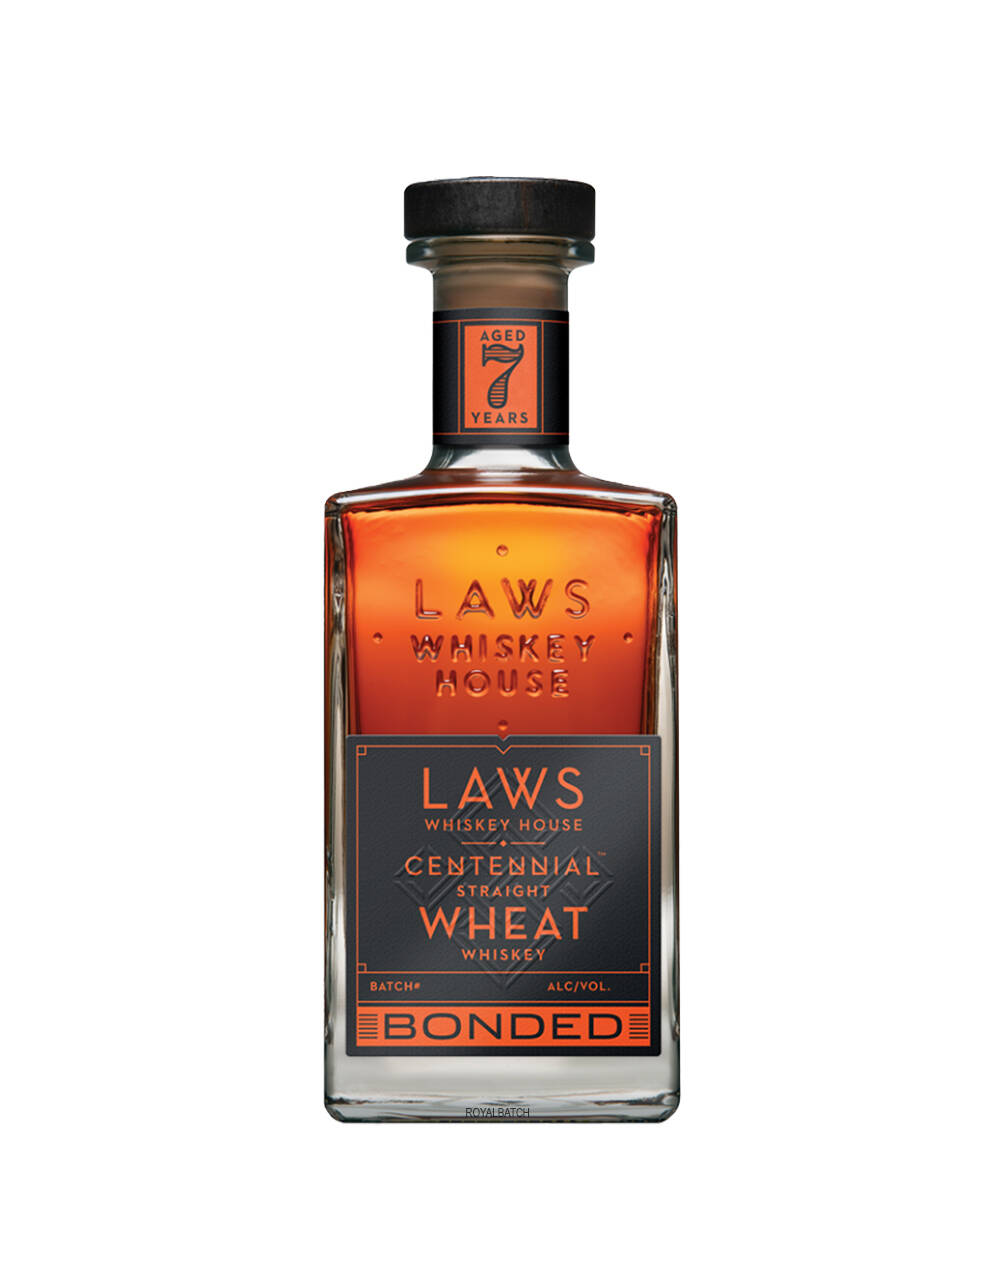 Laws Centennial 7 Year Old Batch 5 Straight Wheat Bonded Whiskey